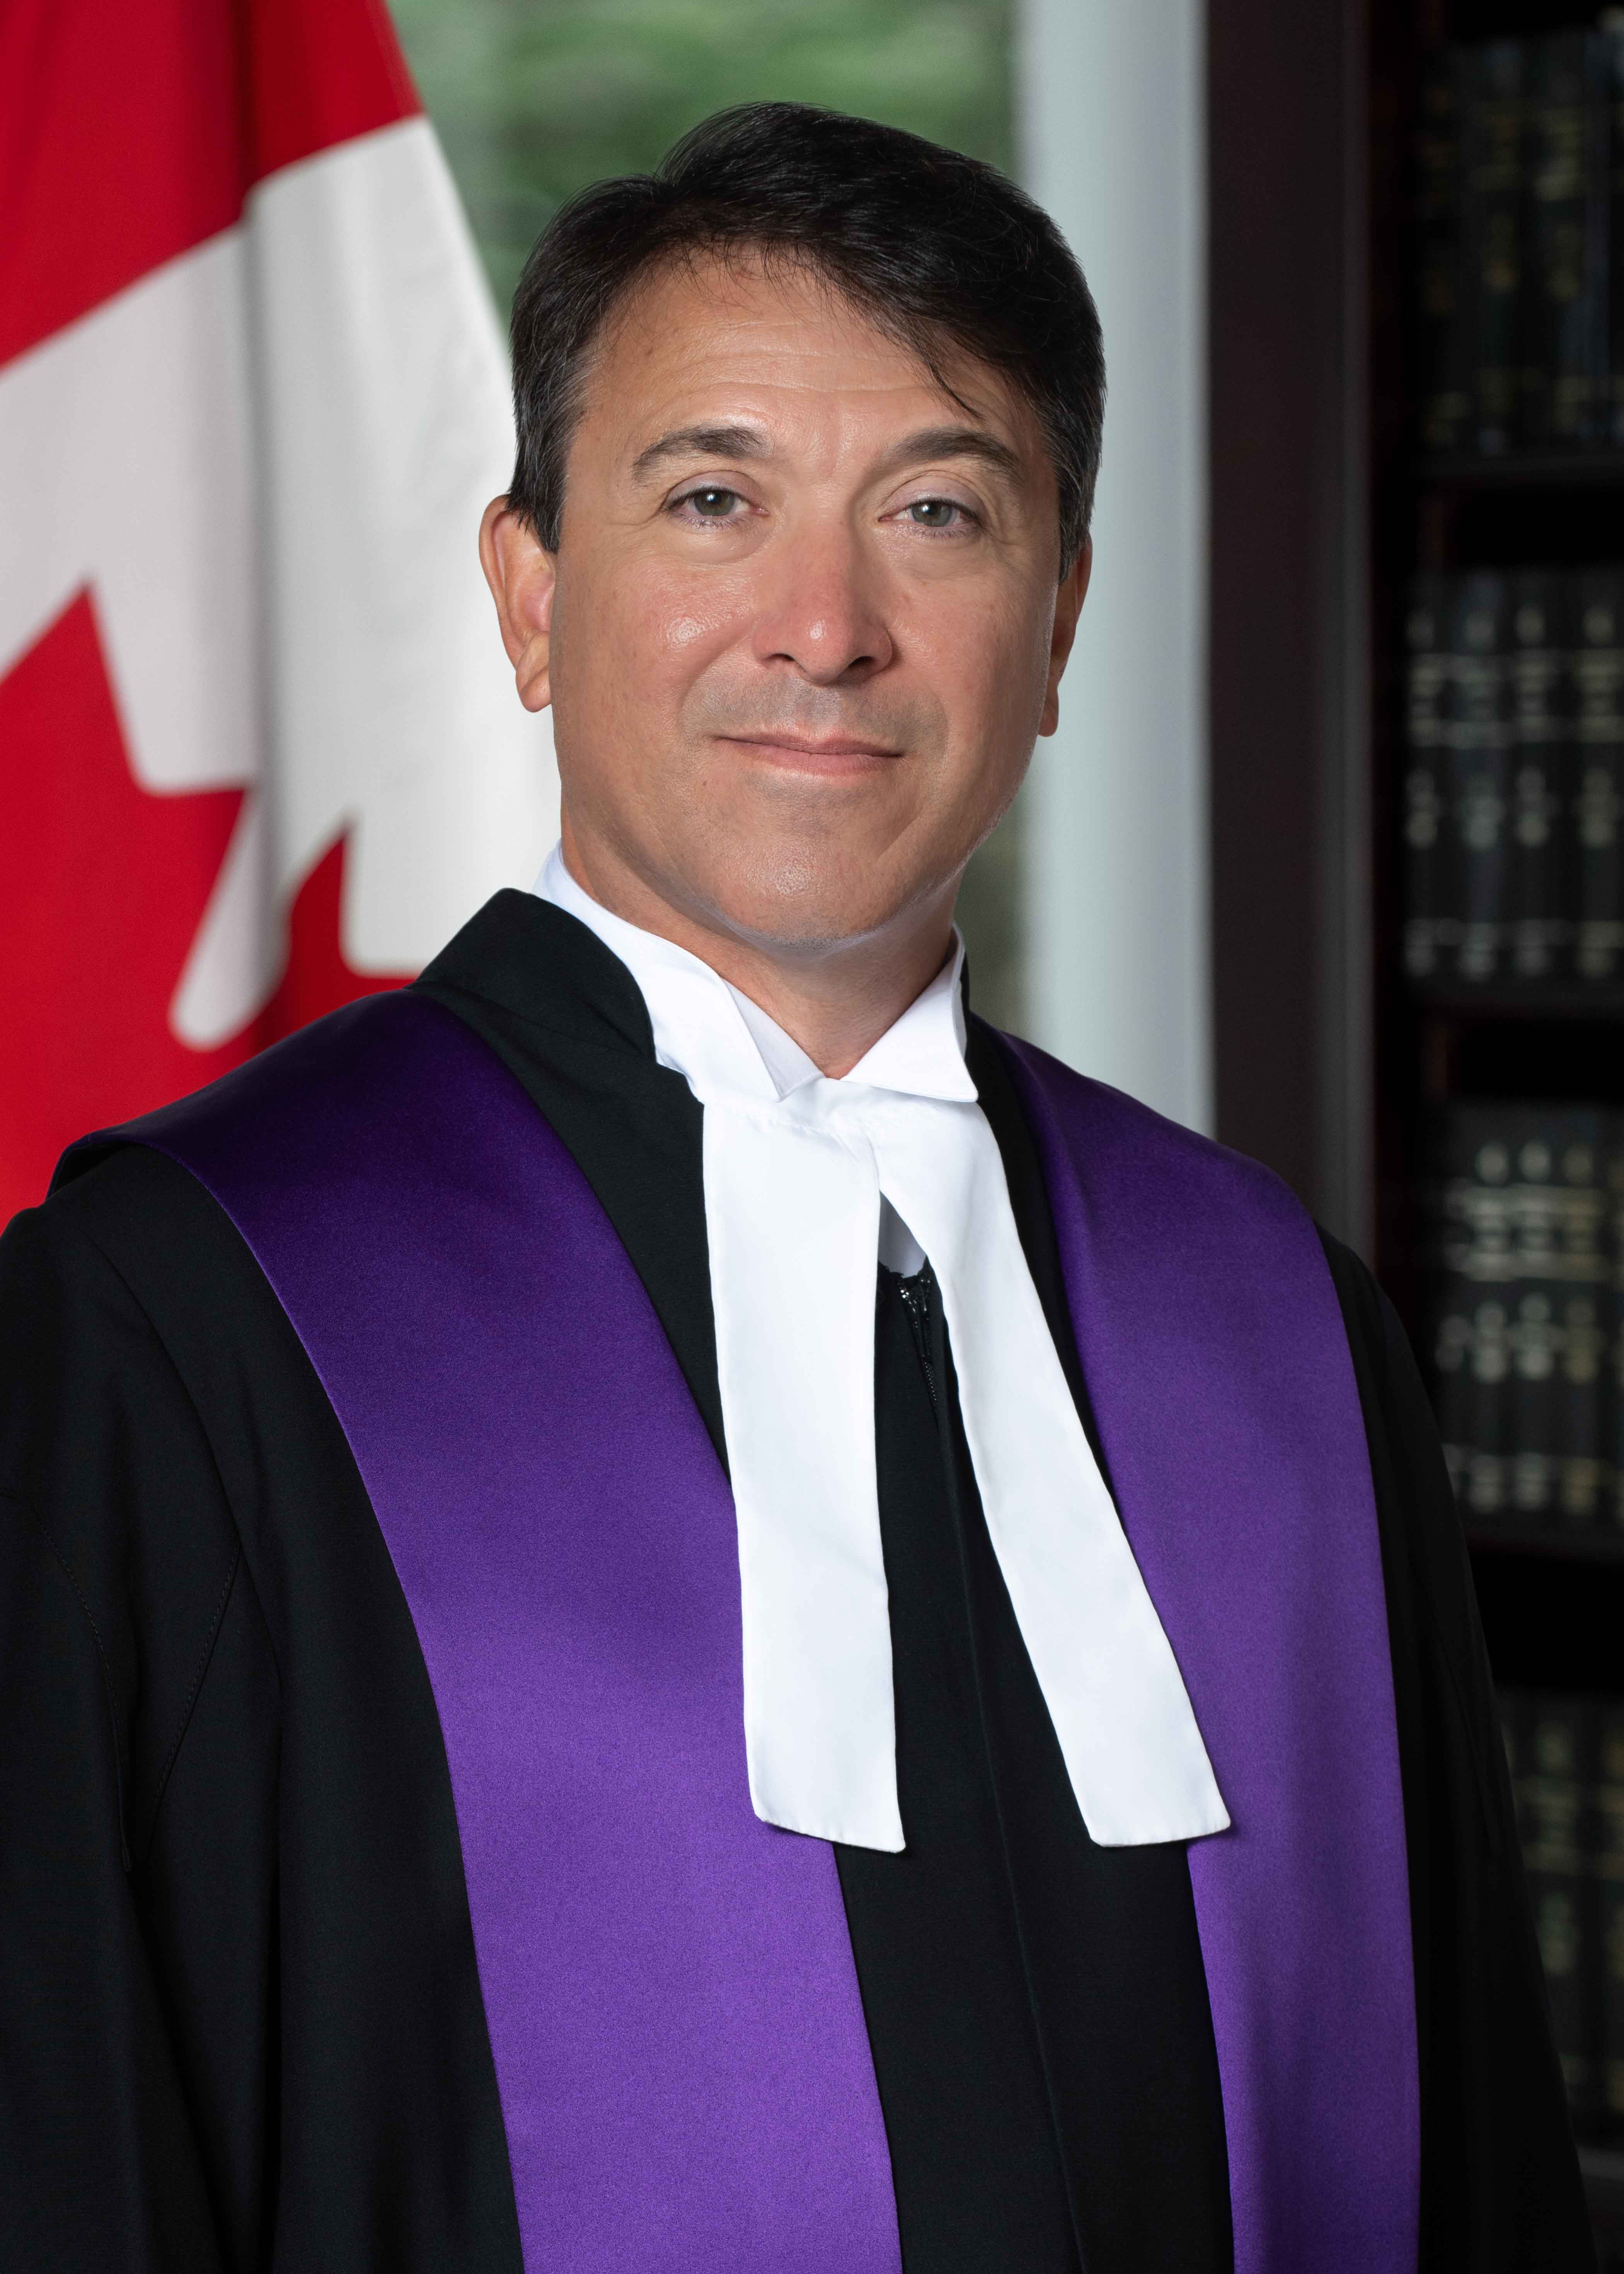 image: L'honorable Guy R. Smith